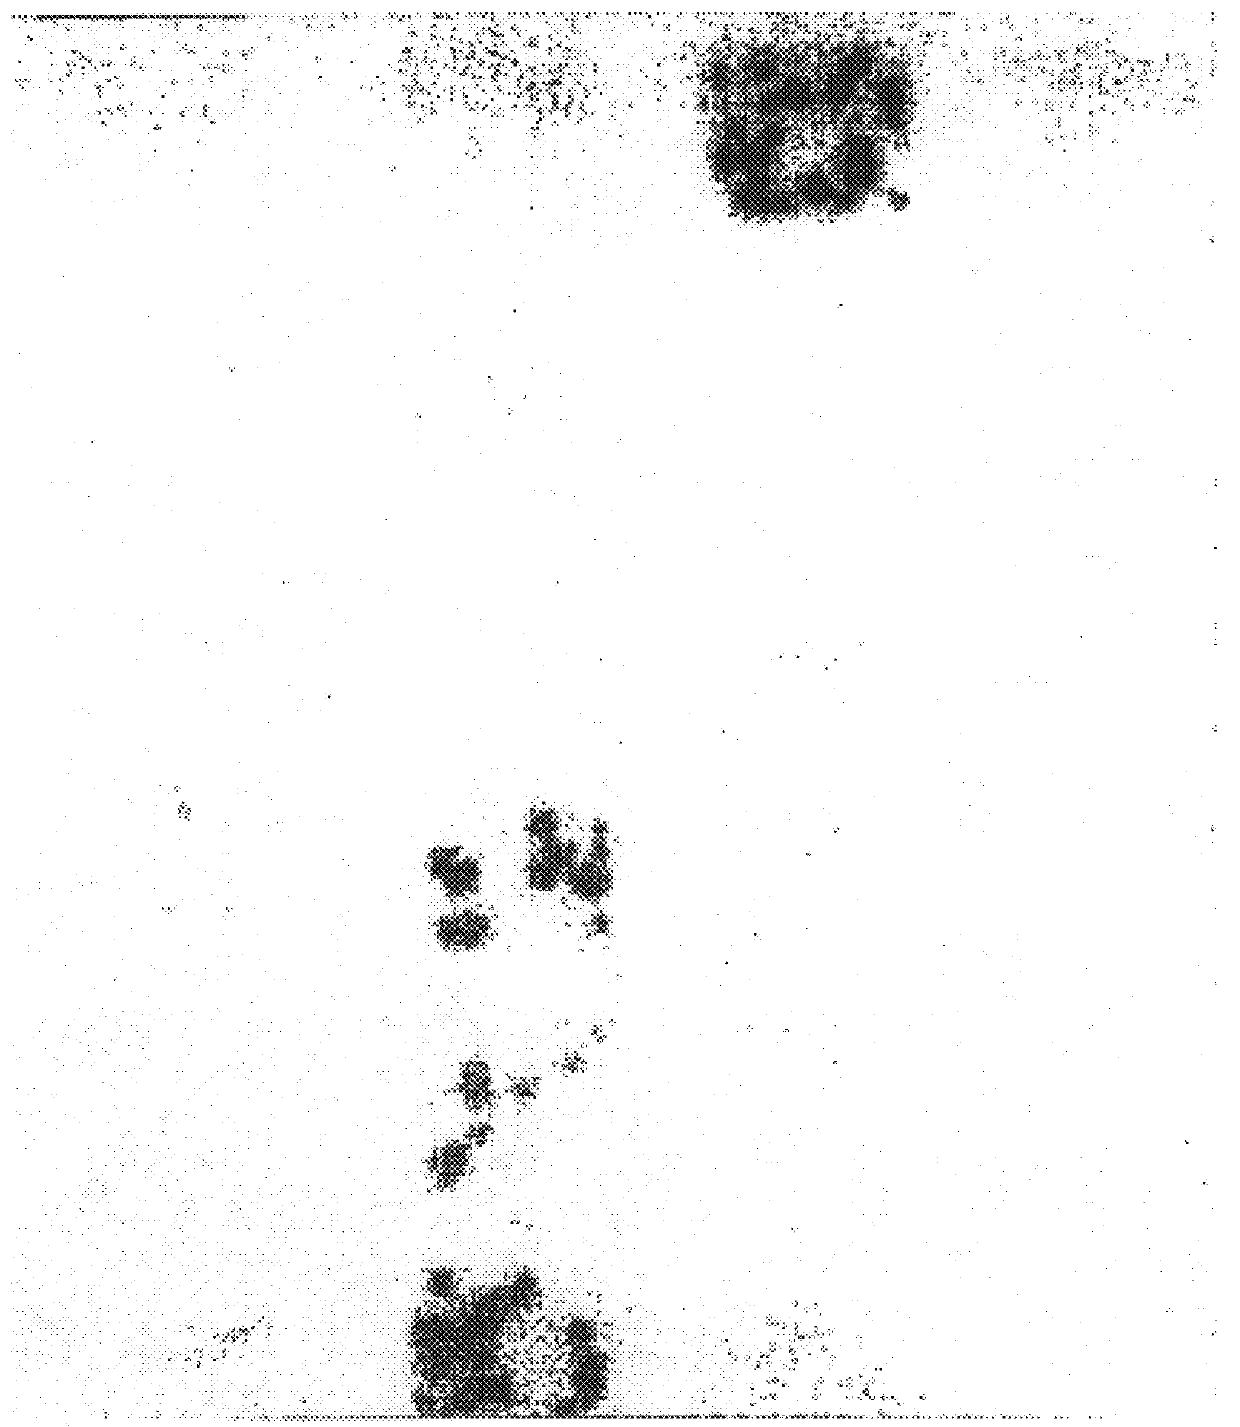 House dust mite allergen, Der p VII, and uses thereof